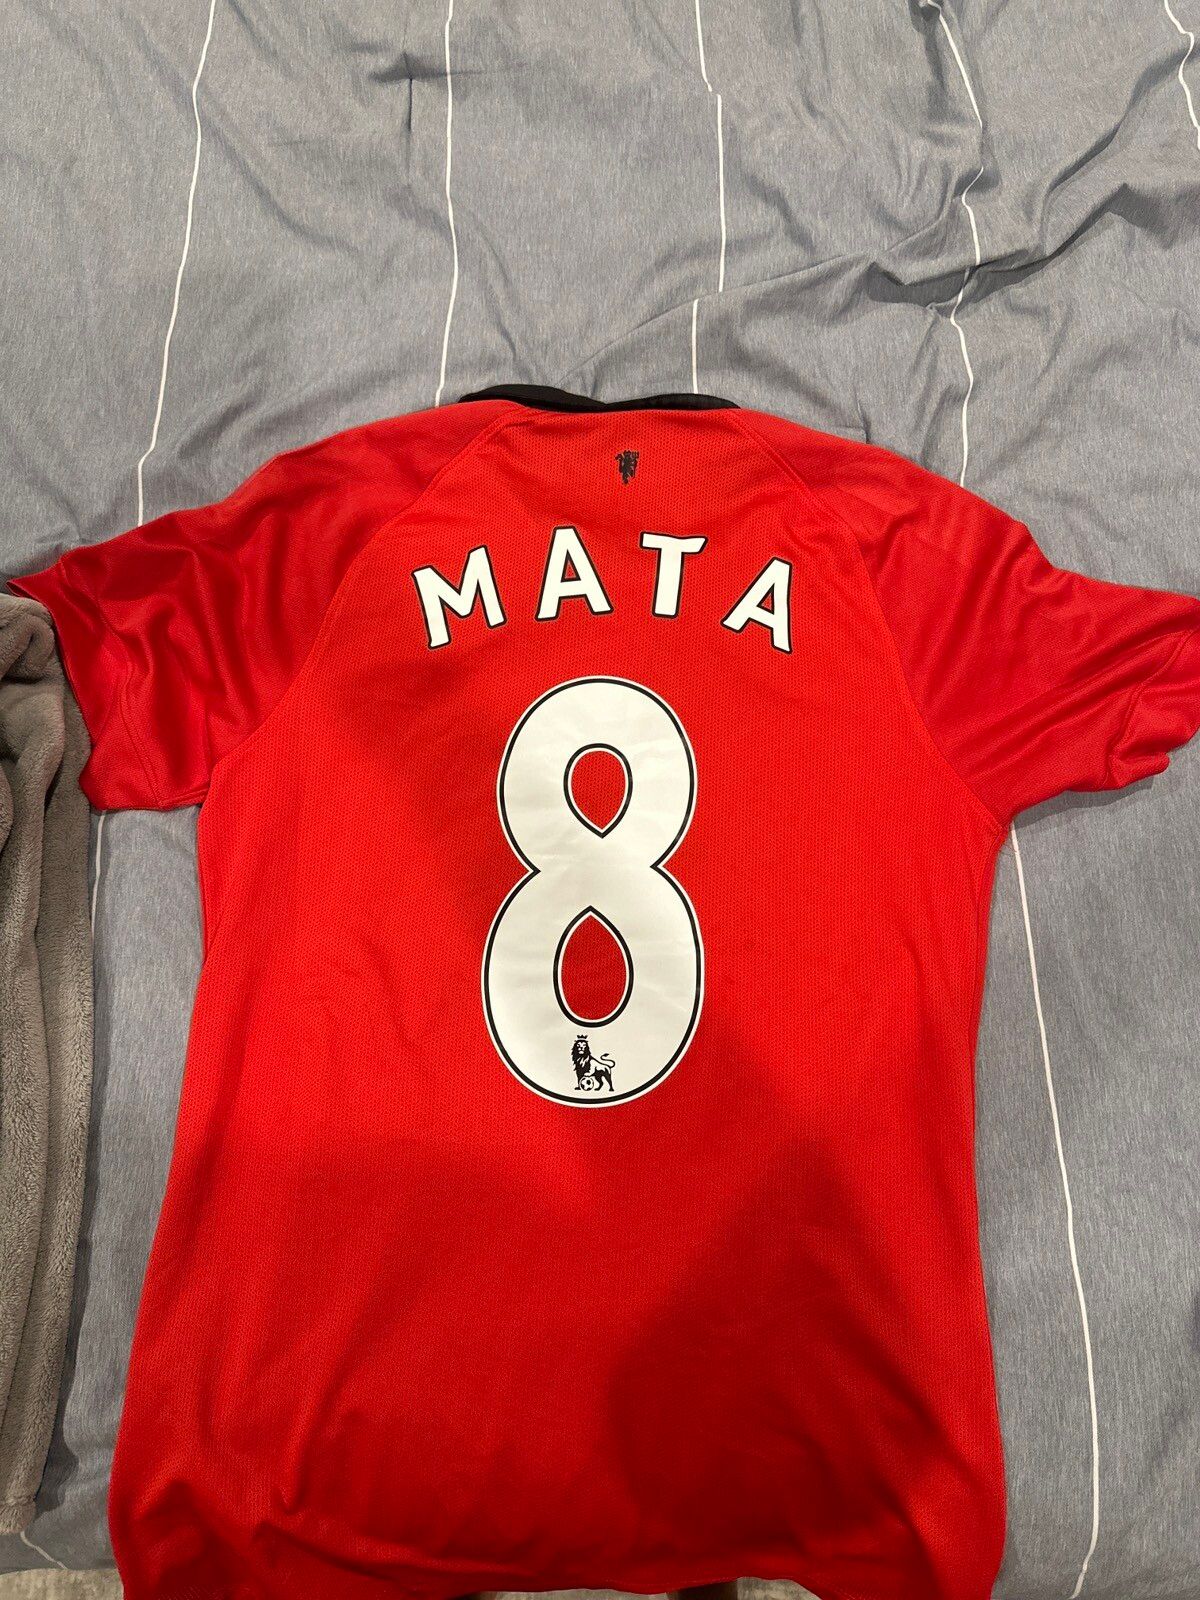 Nike Manchester United jersey Juan Mata #8(authentic) Size US S / EU 44-46 / 1 - 1 Preview